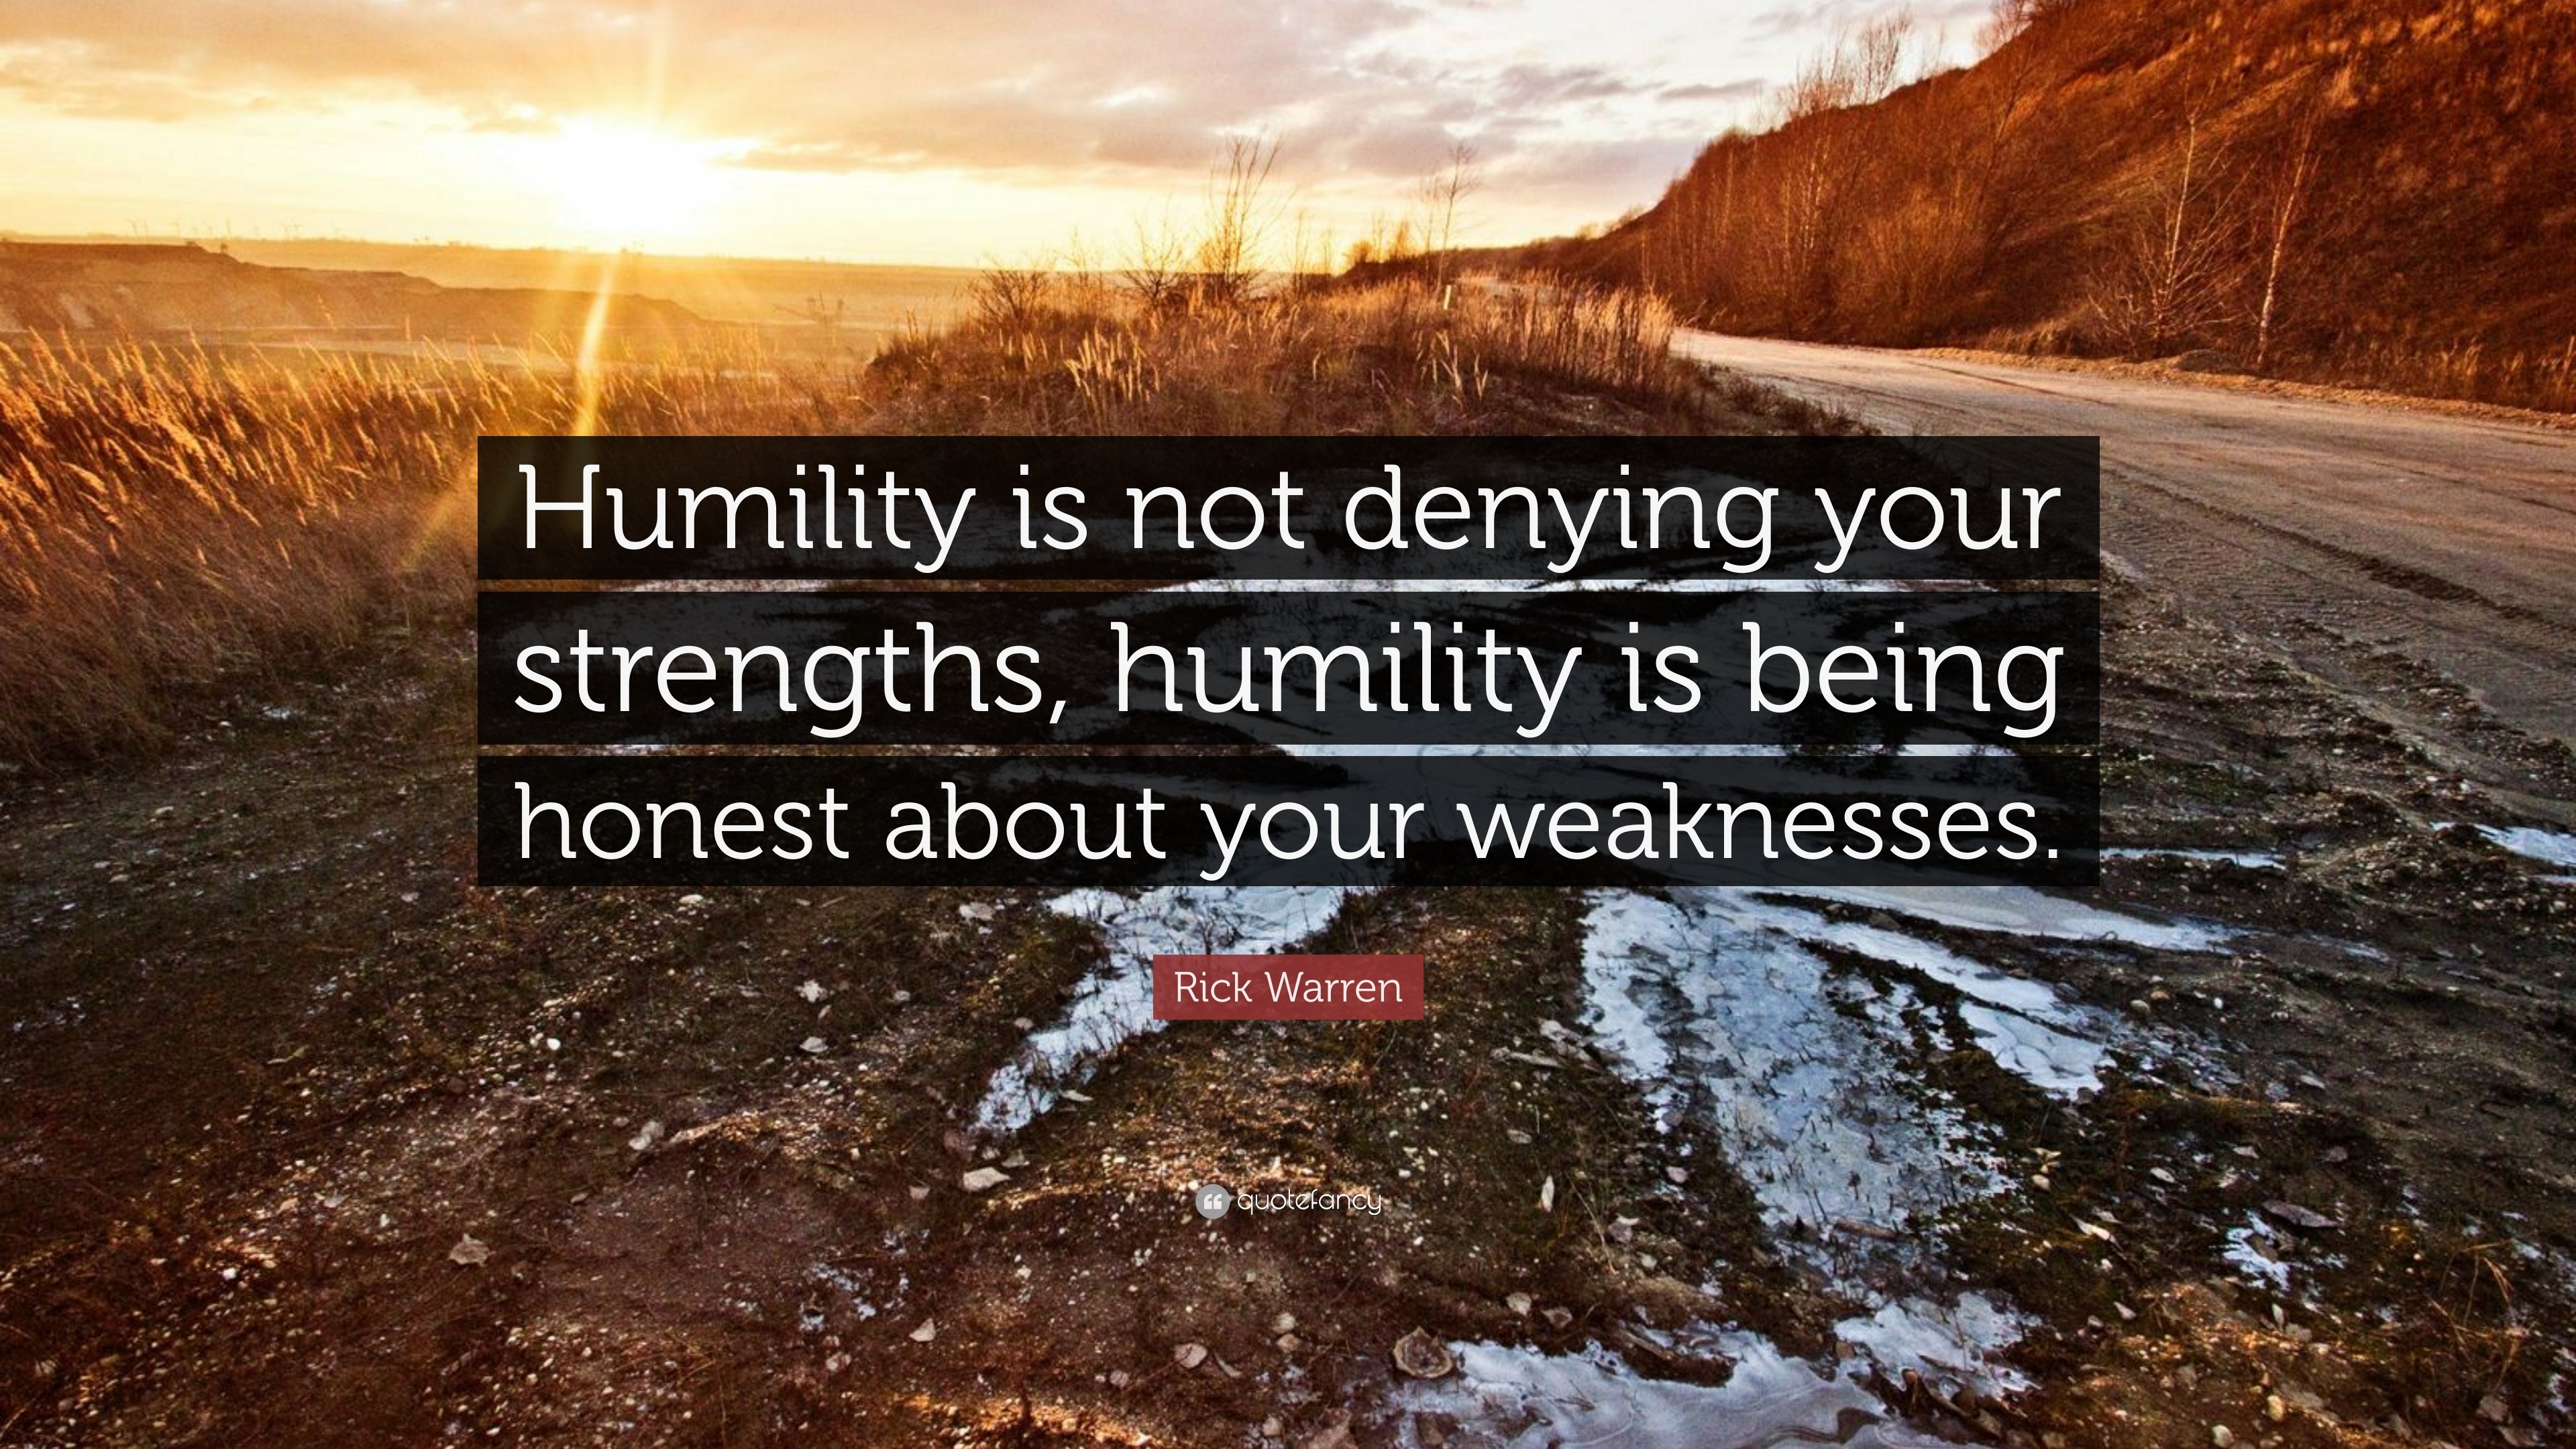 Rick Warren Quote: “Humility is not denying your strengths, humility is ...